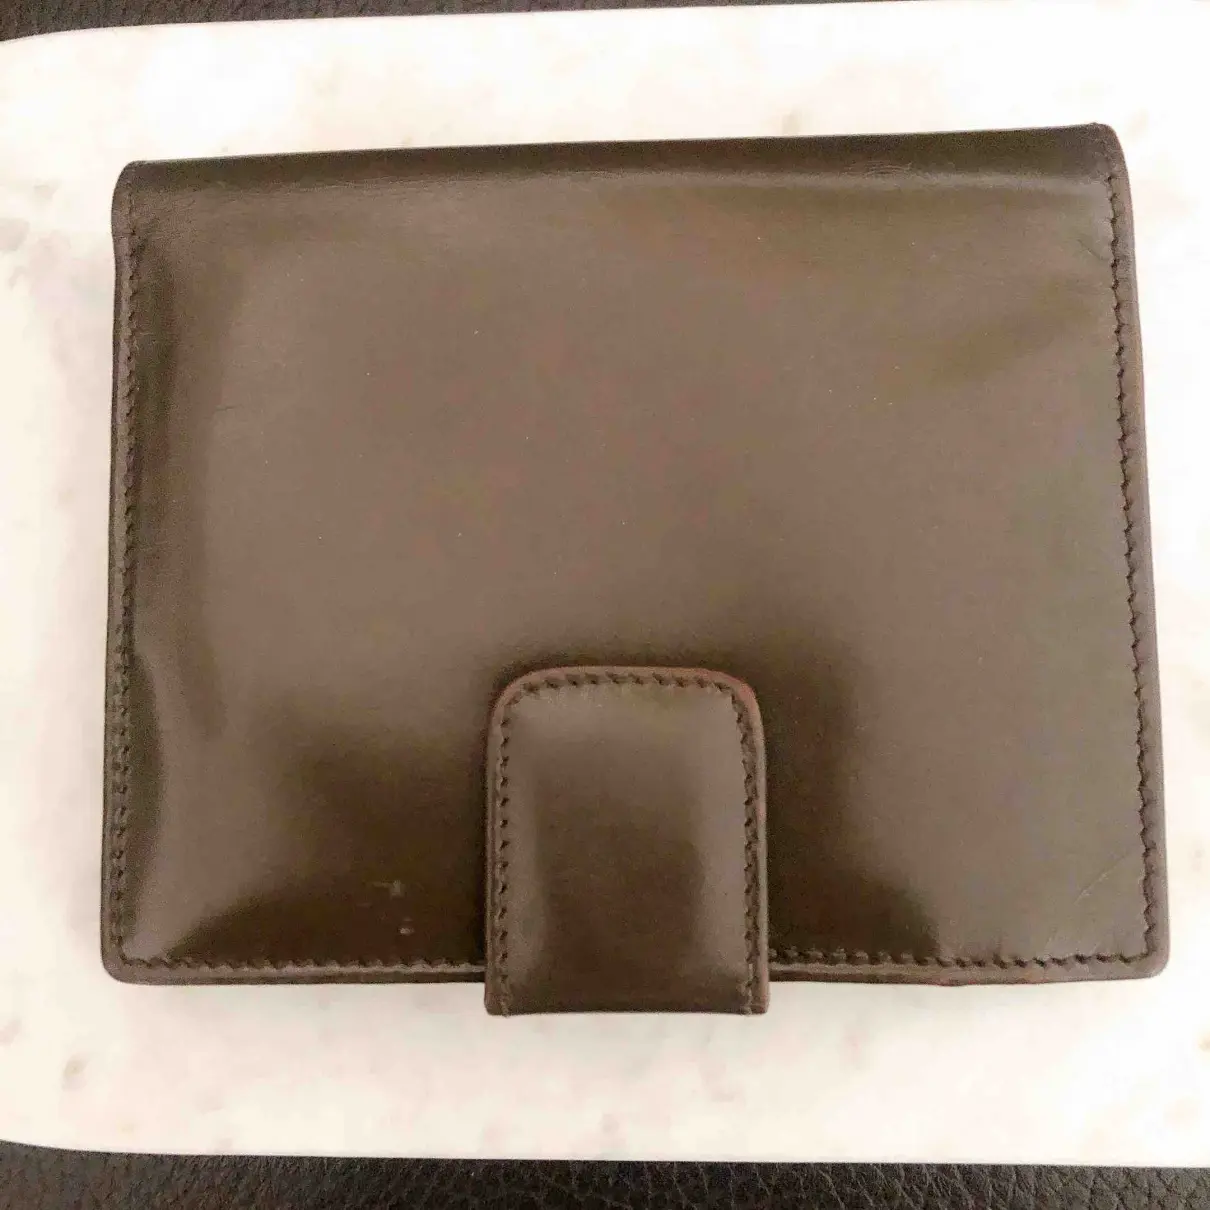 Buy Gucci Patent leather wallet online - Vintage